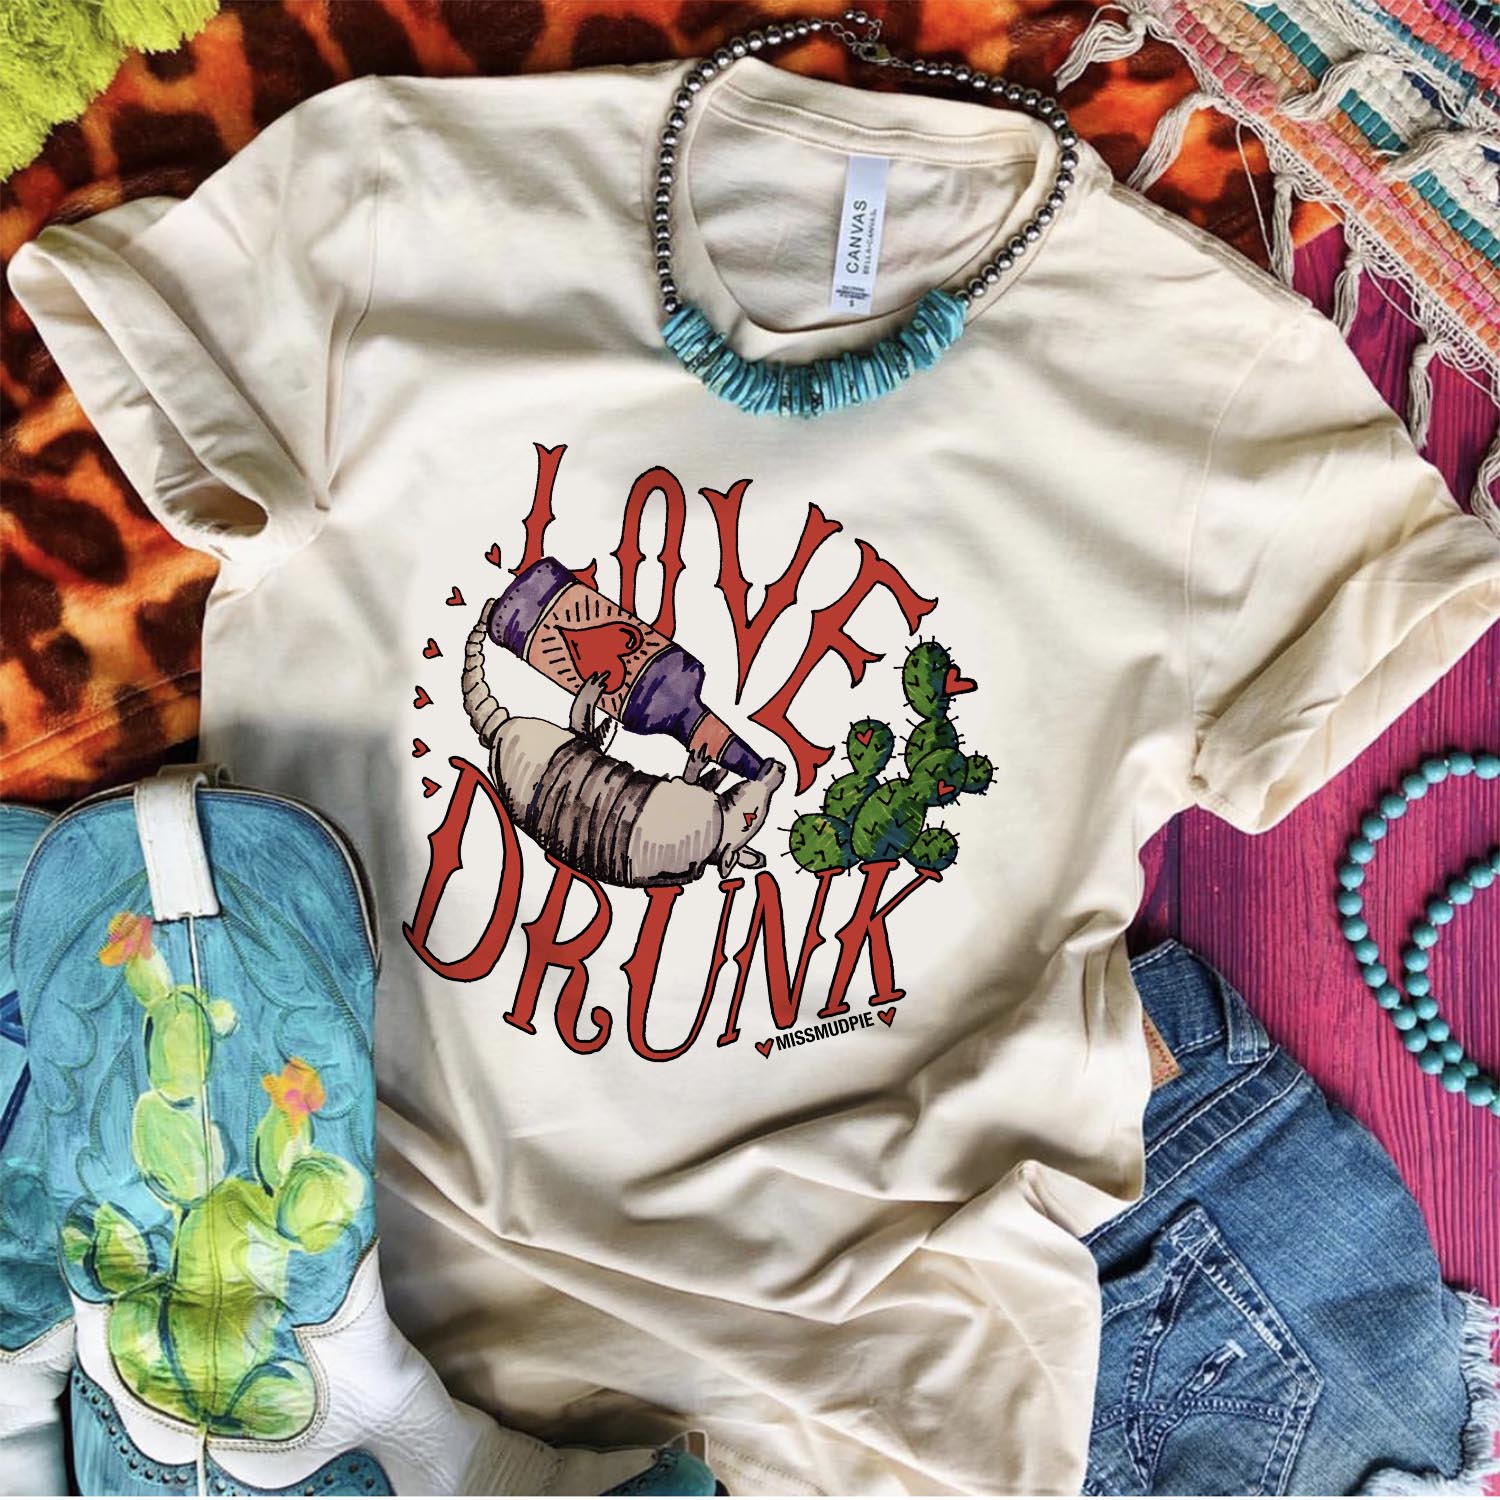 An ivory tee shirt laid on a purple wooden background with cowgirl boots, denim shorts, turquoise and silver necklace, and mix print rugs. The tee shirt has a graphic that says  "Love Drunk" with and armadillo drinking from a bottle.